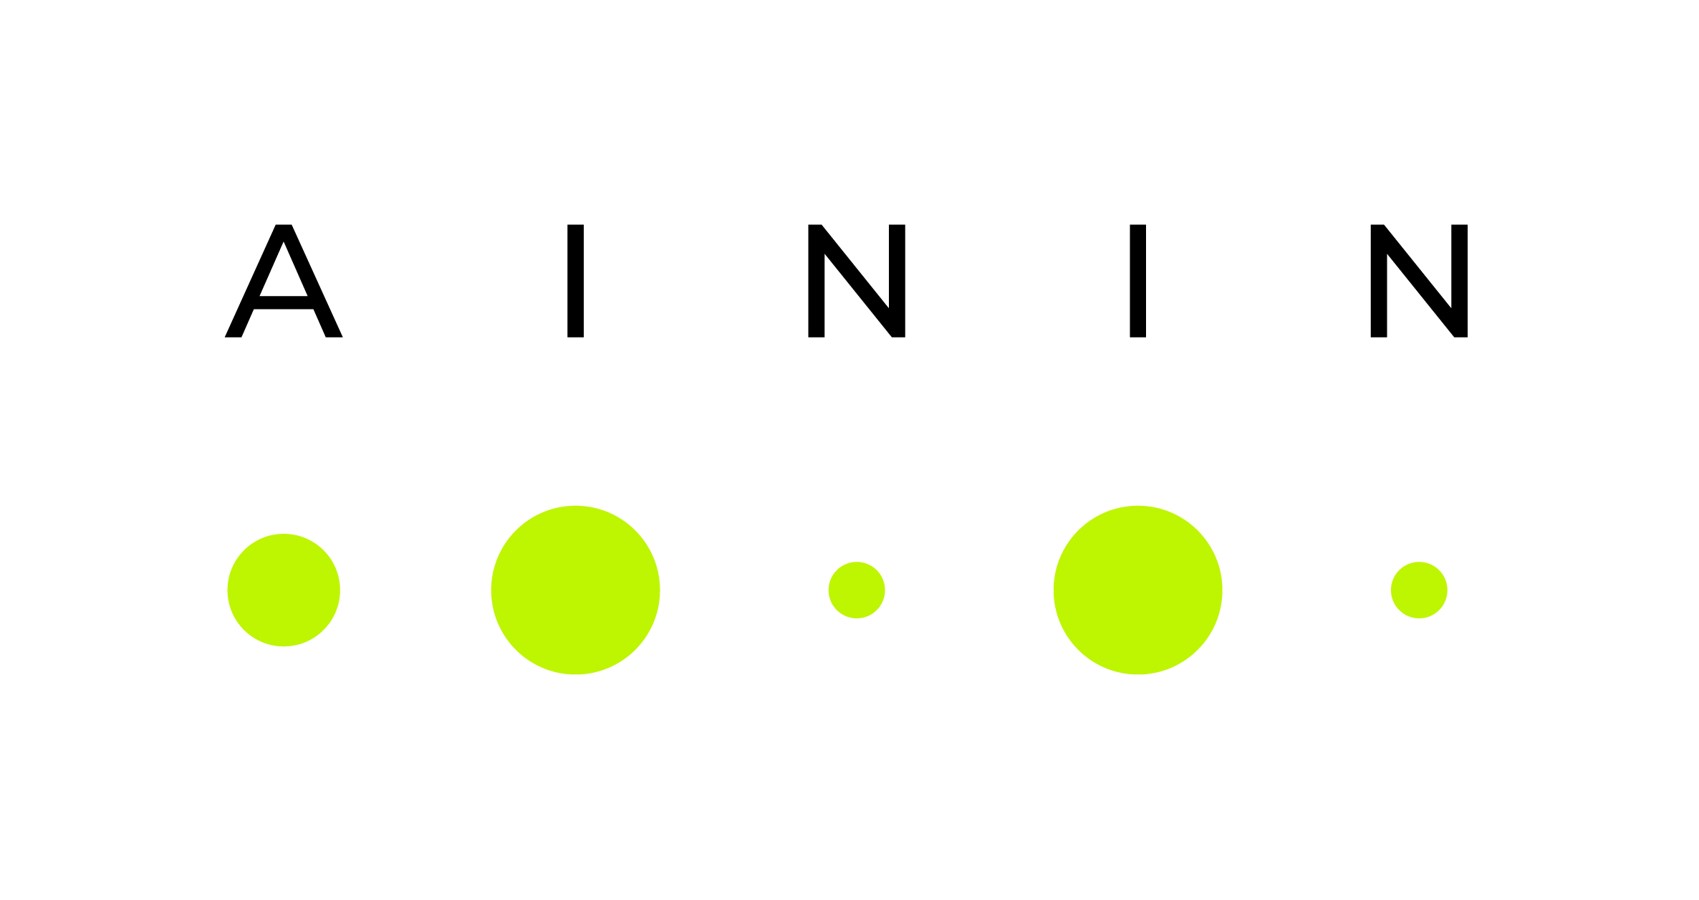 Illustration of the AININ lettering with four neon green dots of different sizes below it